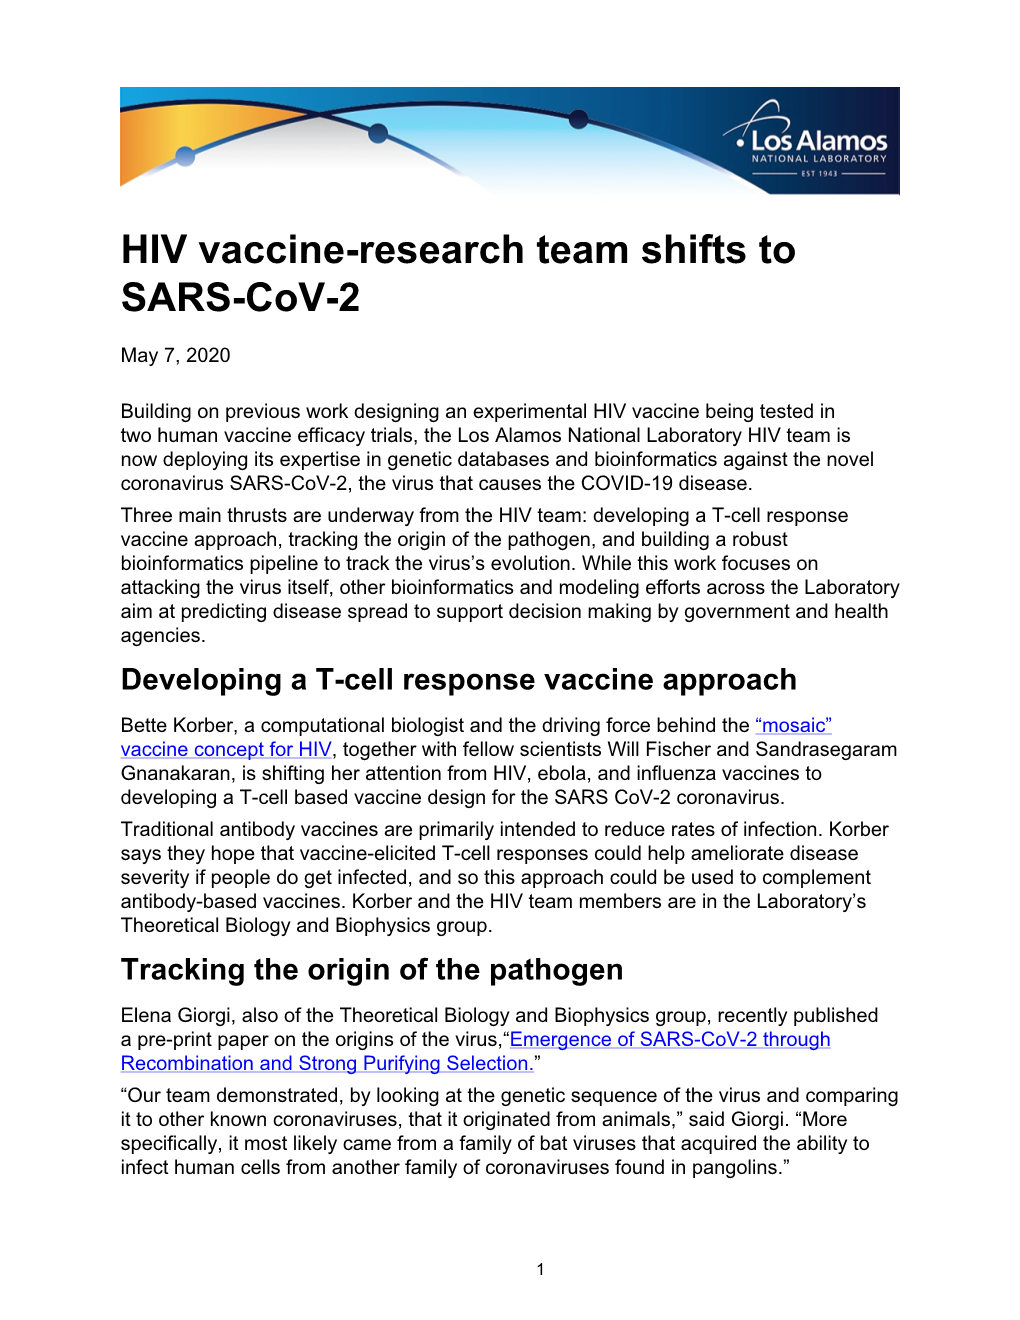 HIV Vaccine-Research Team Shifts to SARS-Cov-2